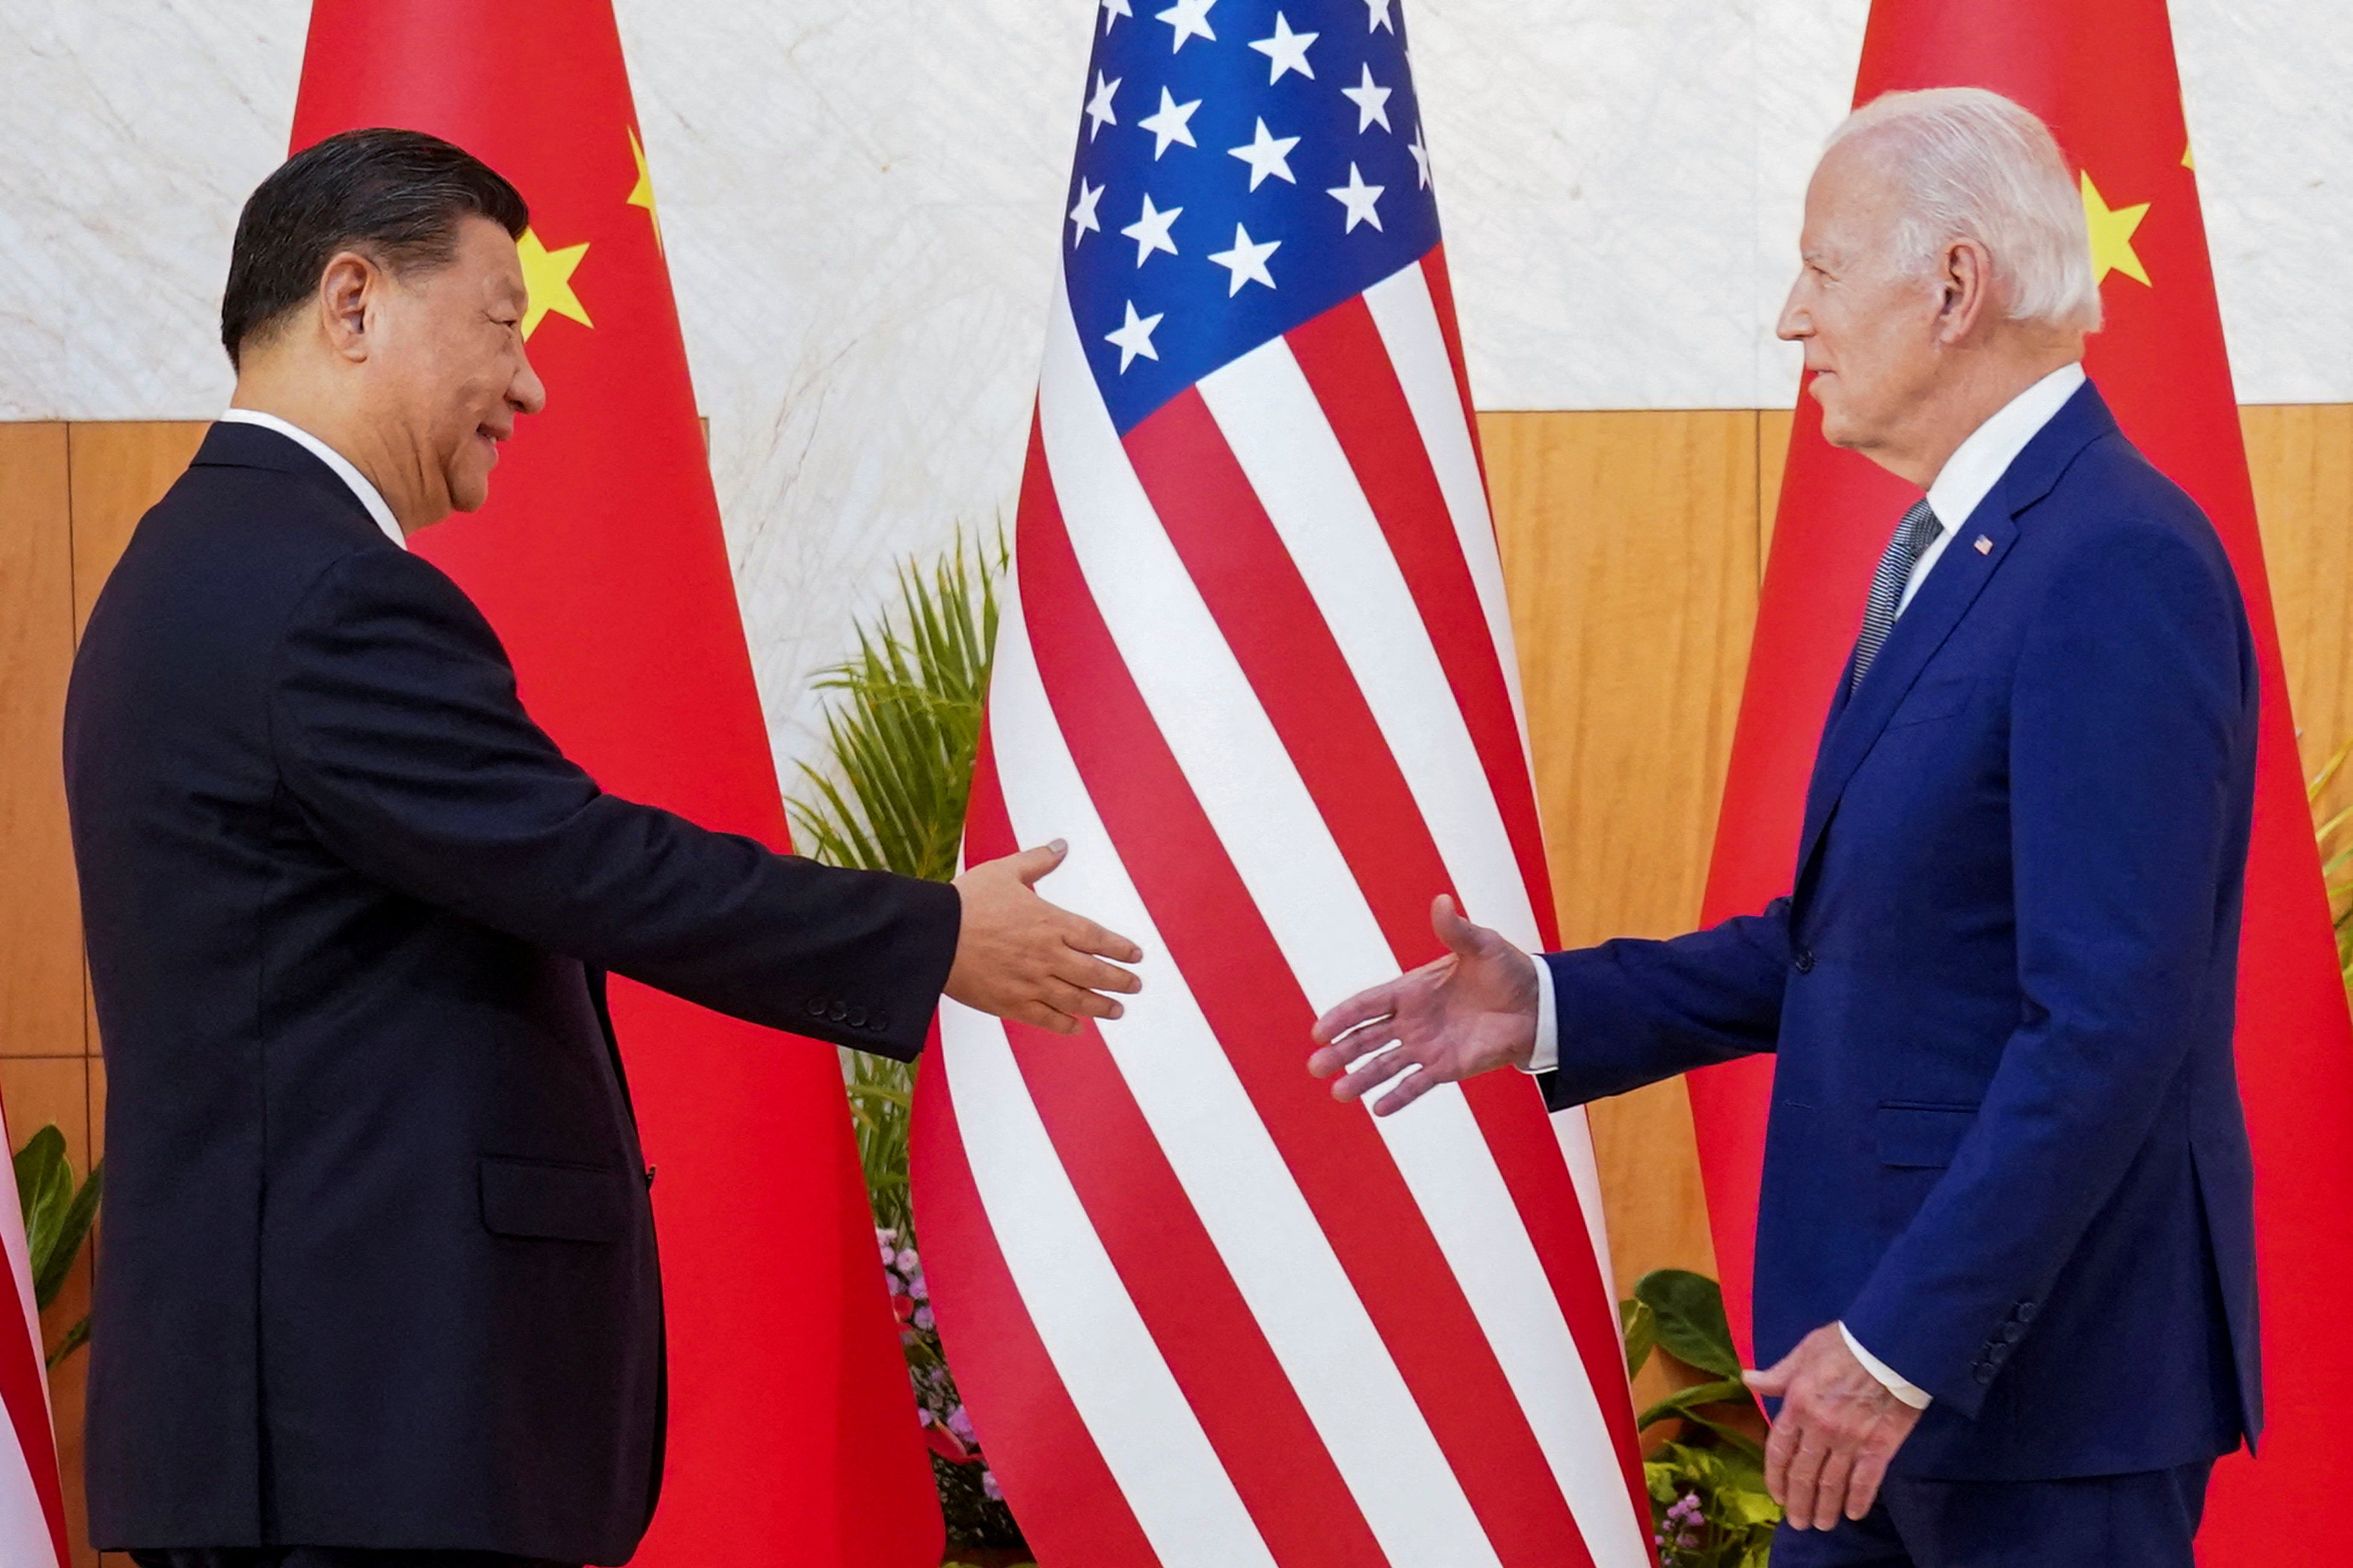 FILE PHOTO: U.S. President Joe Biden meets with Chinese President Xi Jinping on the sidelines of the G20 leaders' summit in Bali, Indonesia, November 14, 2022.